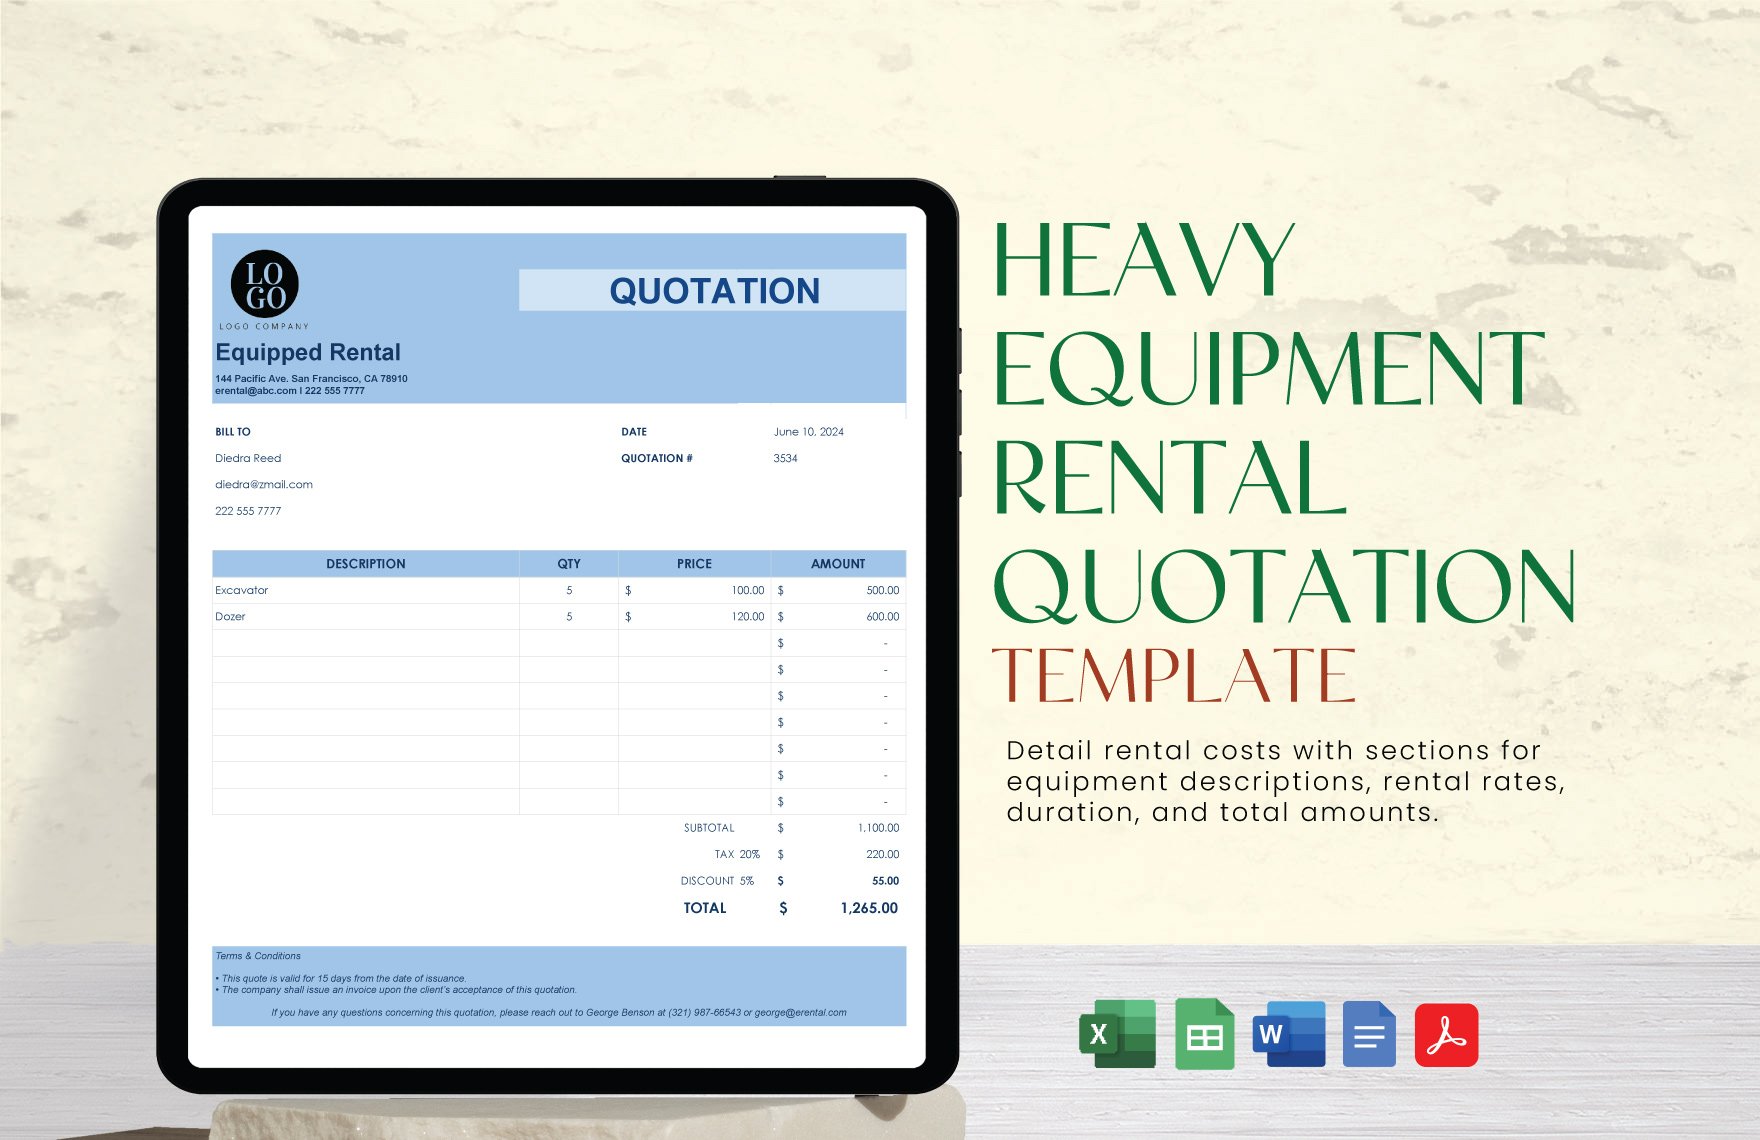 Heavy Equipment Rental Quotation Template in Word, Google Docs, Excel, PDF, Google Sheets